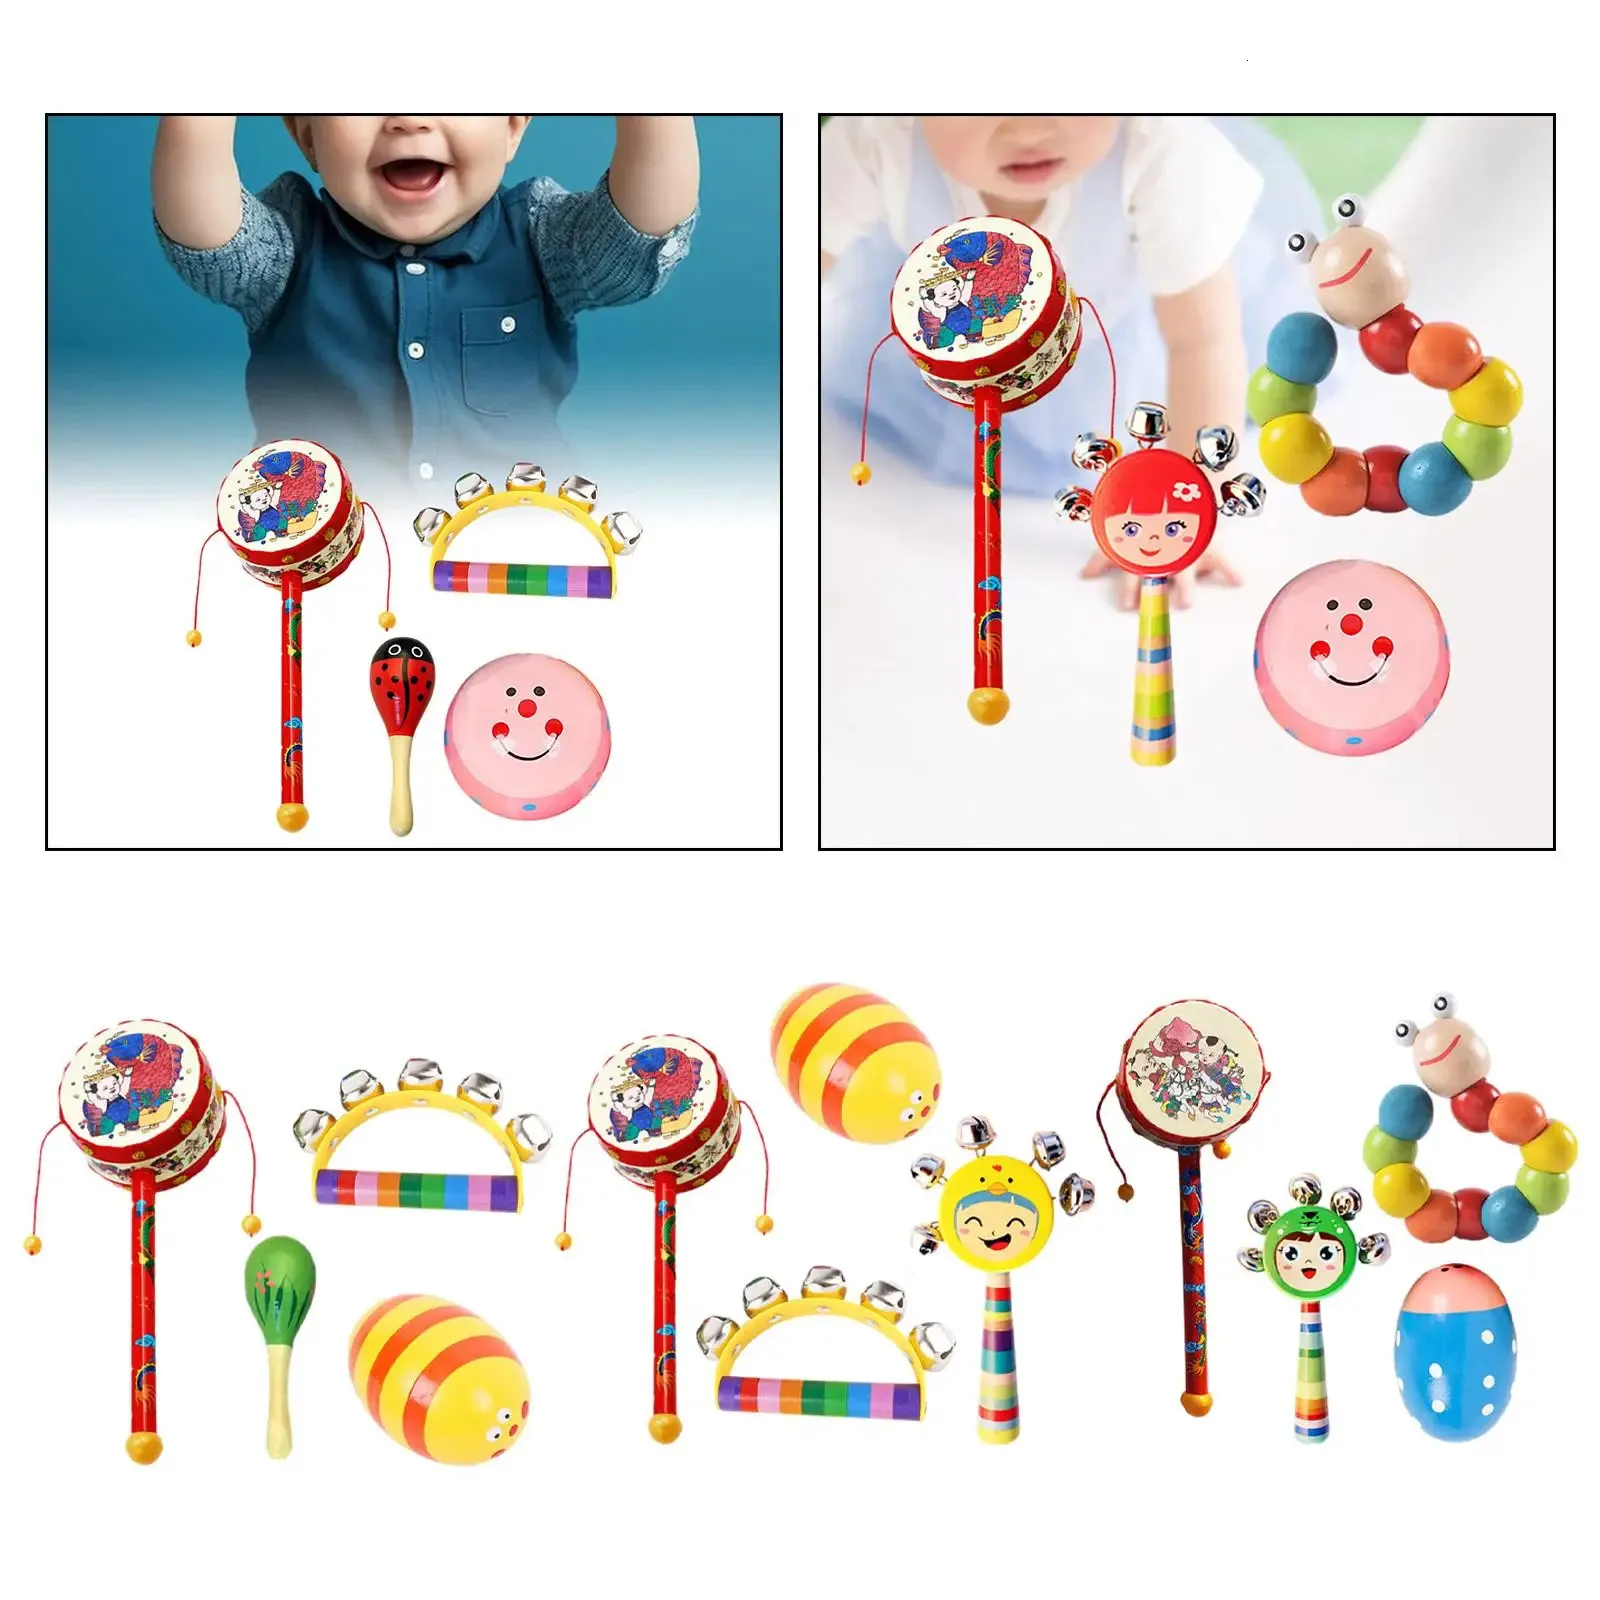 4x Wooden Musical Instruments Set Noisemaker Toy Premium Percussion Rhythm Kits for Boys Girls Newborn Party Baby Holiday